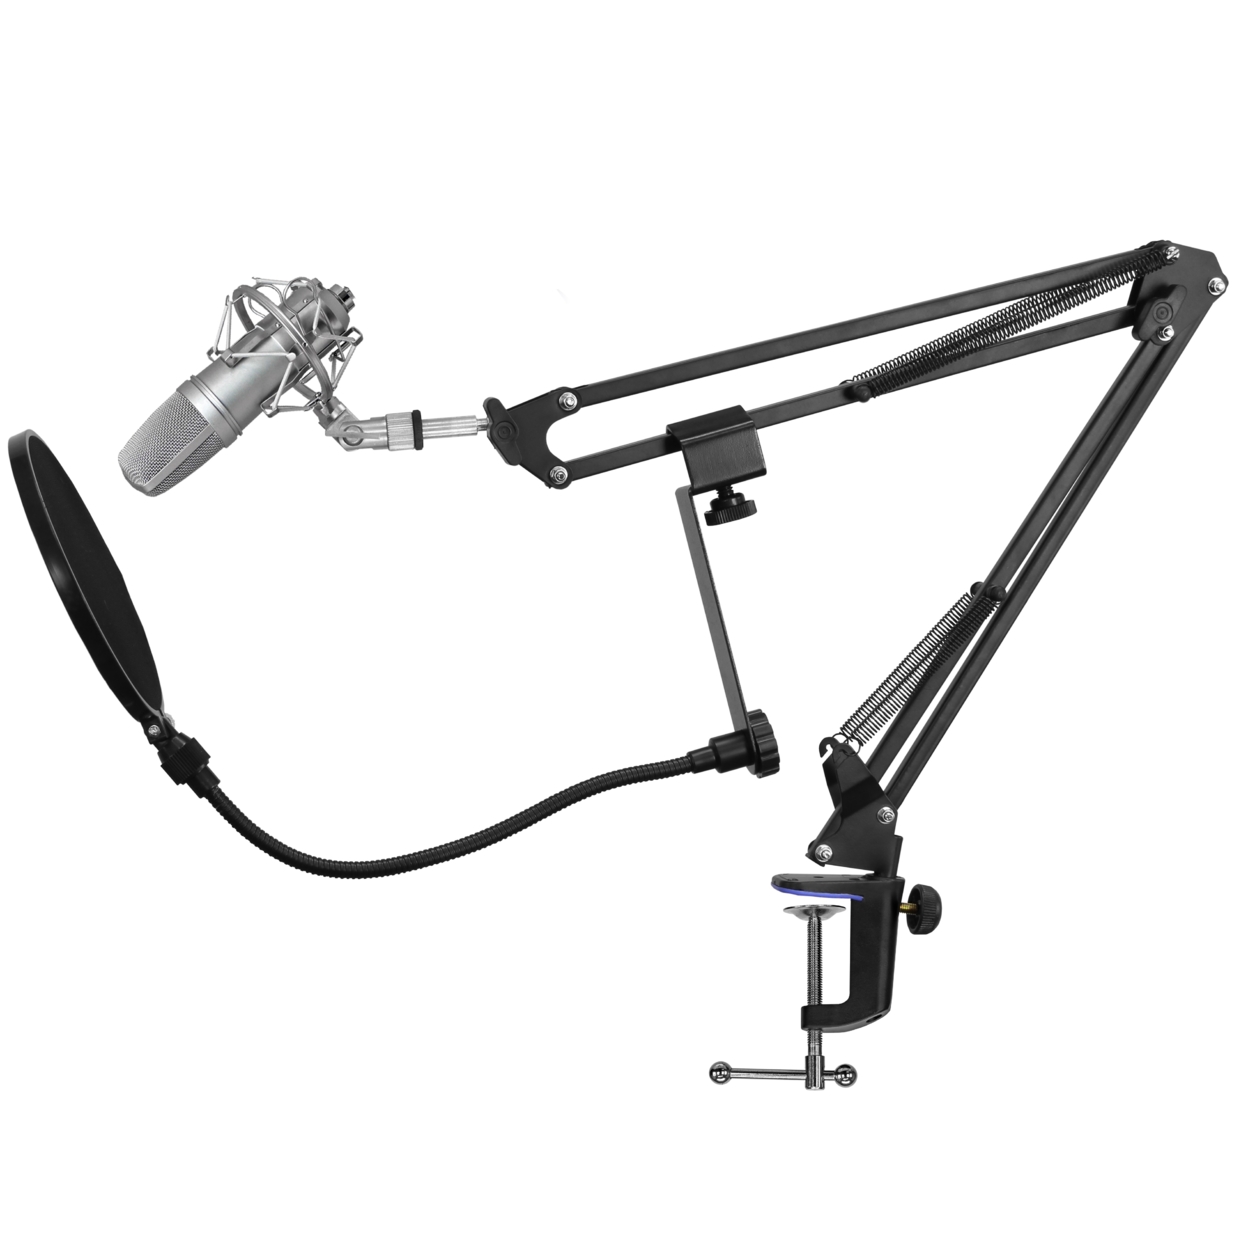 Technical Pro Professional USB Condenser Microphone Kit W/ Adjustable Scissor Arm Stand, Starter Package For Recording, Podcasting, YouTube